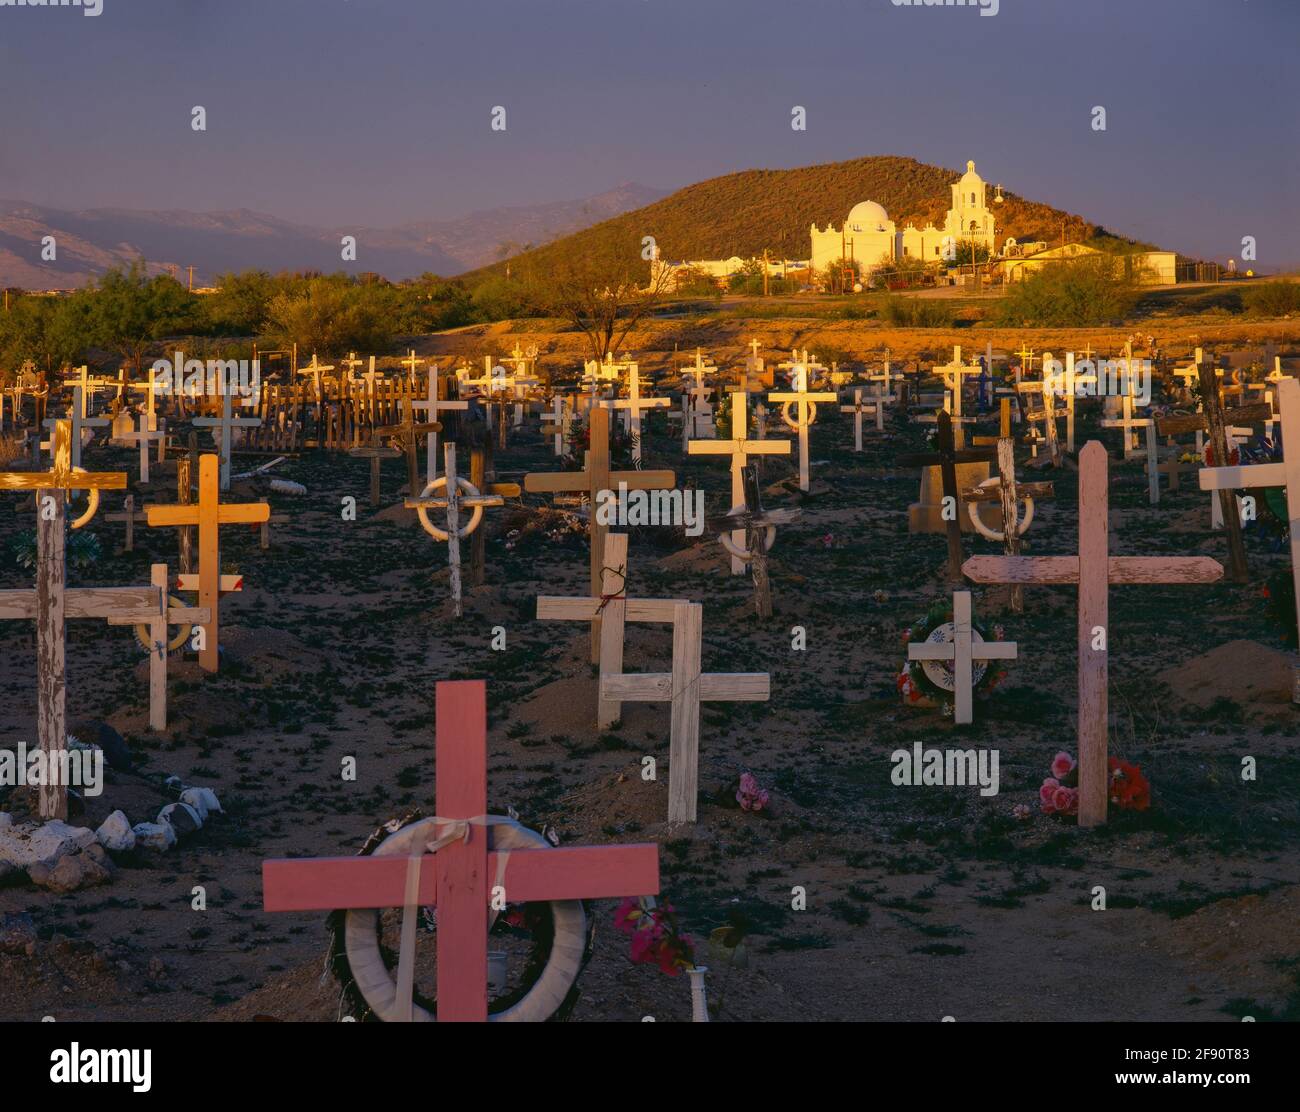 TOHONO O'ODHAM NATION,  AZ/MY SAN XAVIER MISSION AND RINCON MTNS ON  HORIZON BEYOND A CEMETERY THICK WITH  DECORATED WOODEN CROSSES Stock Photo